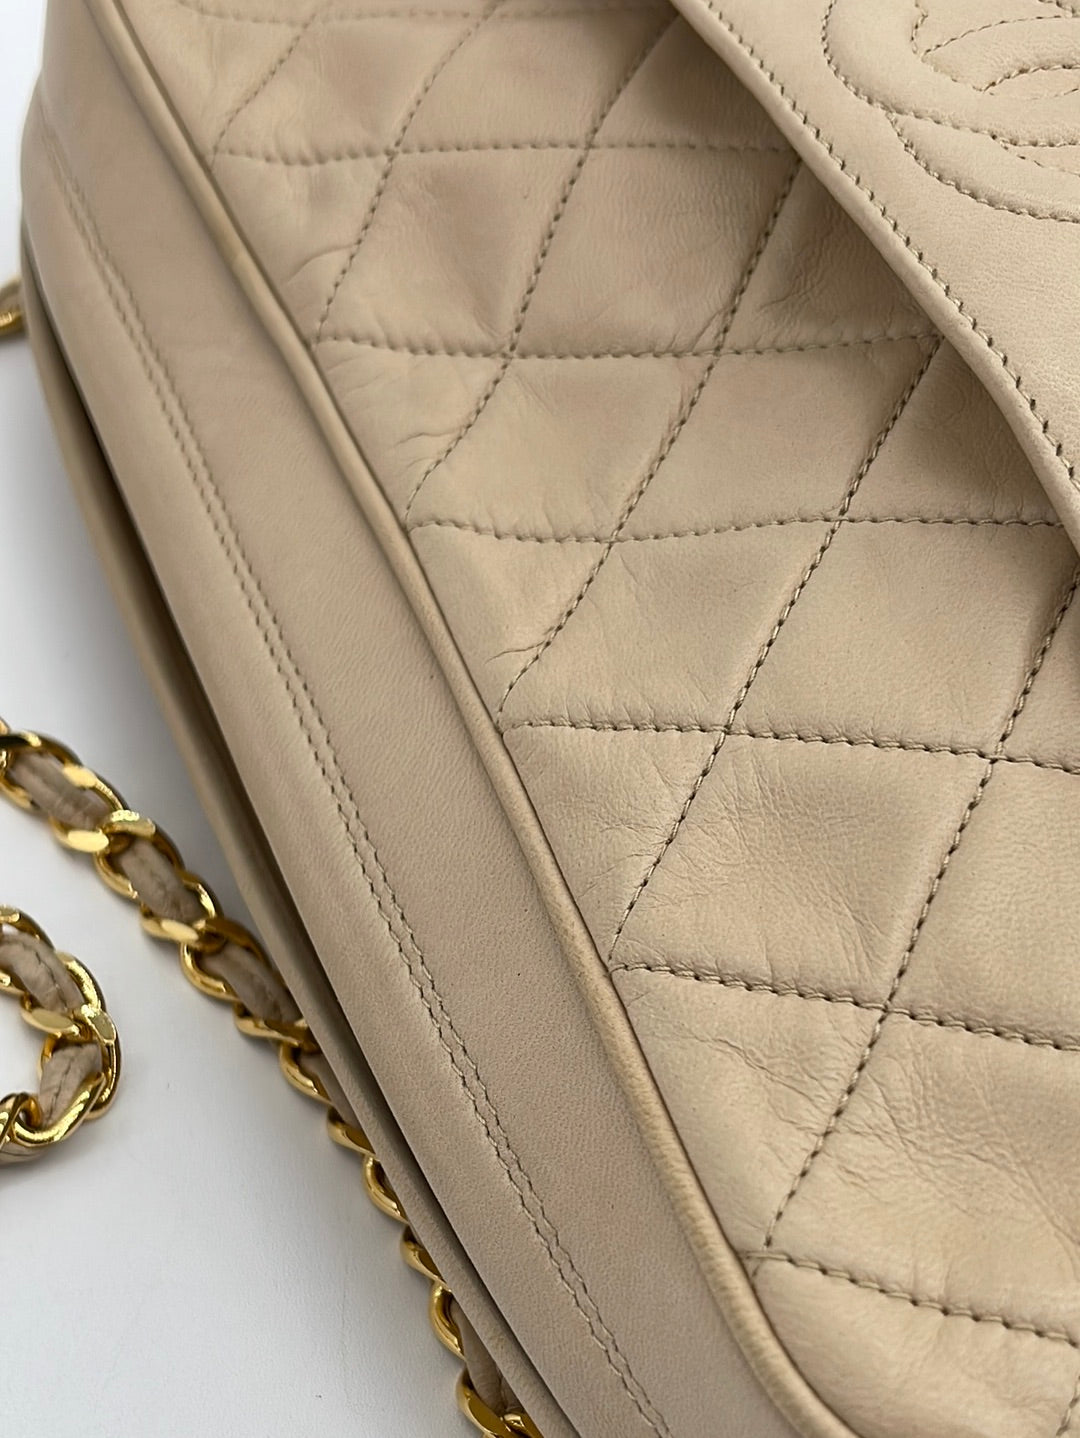 Authentic Chanel Vintage Beige Lambskin Quilted Camera Style Handbag –  Classic Coco Authentic Vintage Luxury